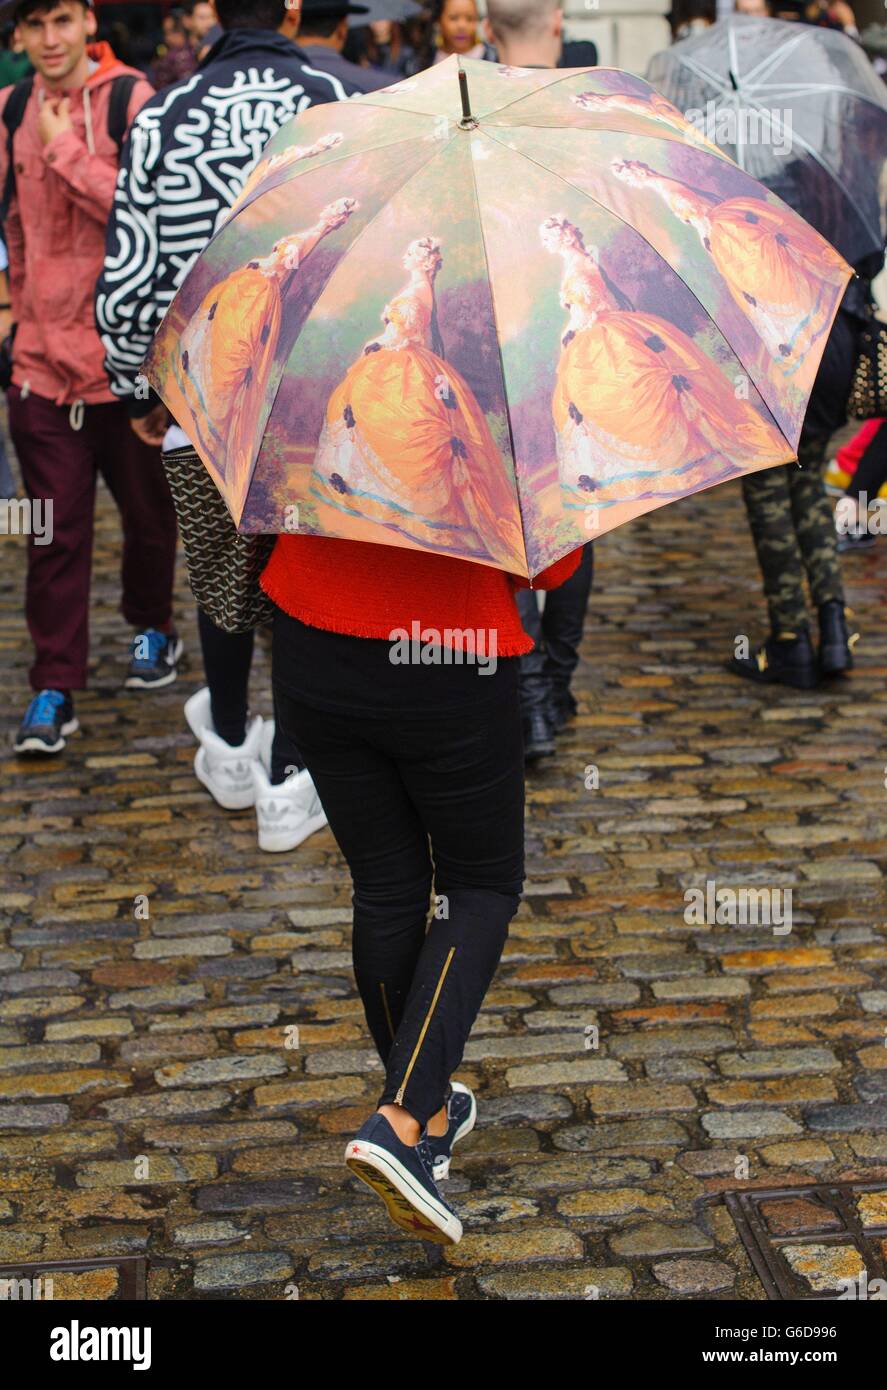 Arrivals - London Fashion Week 2013. An attendee shelters from the rain at Somerset House, central London, during London Fashion Week 2013. Stock Photo